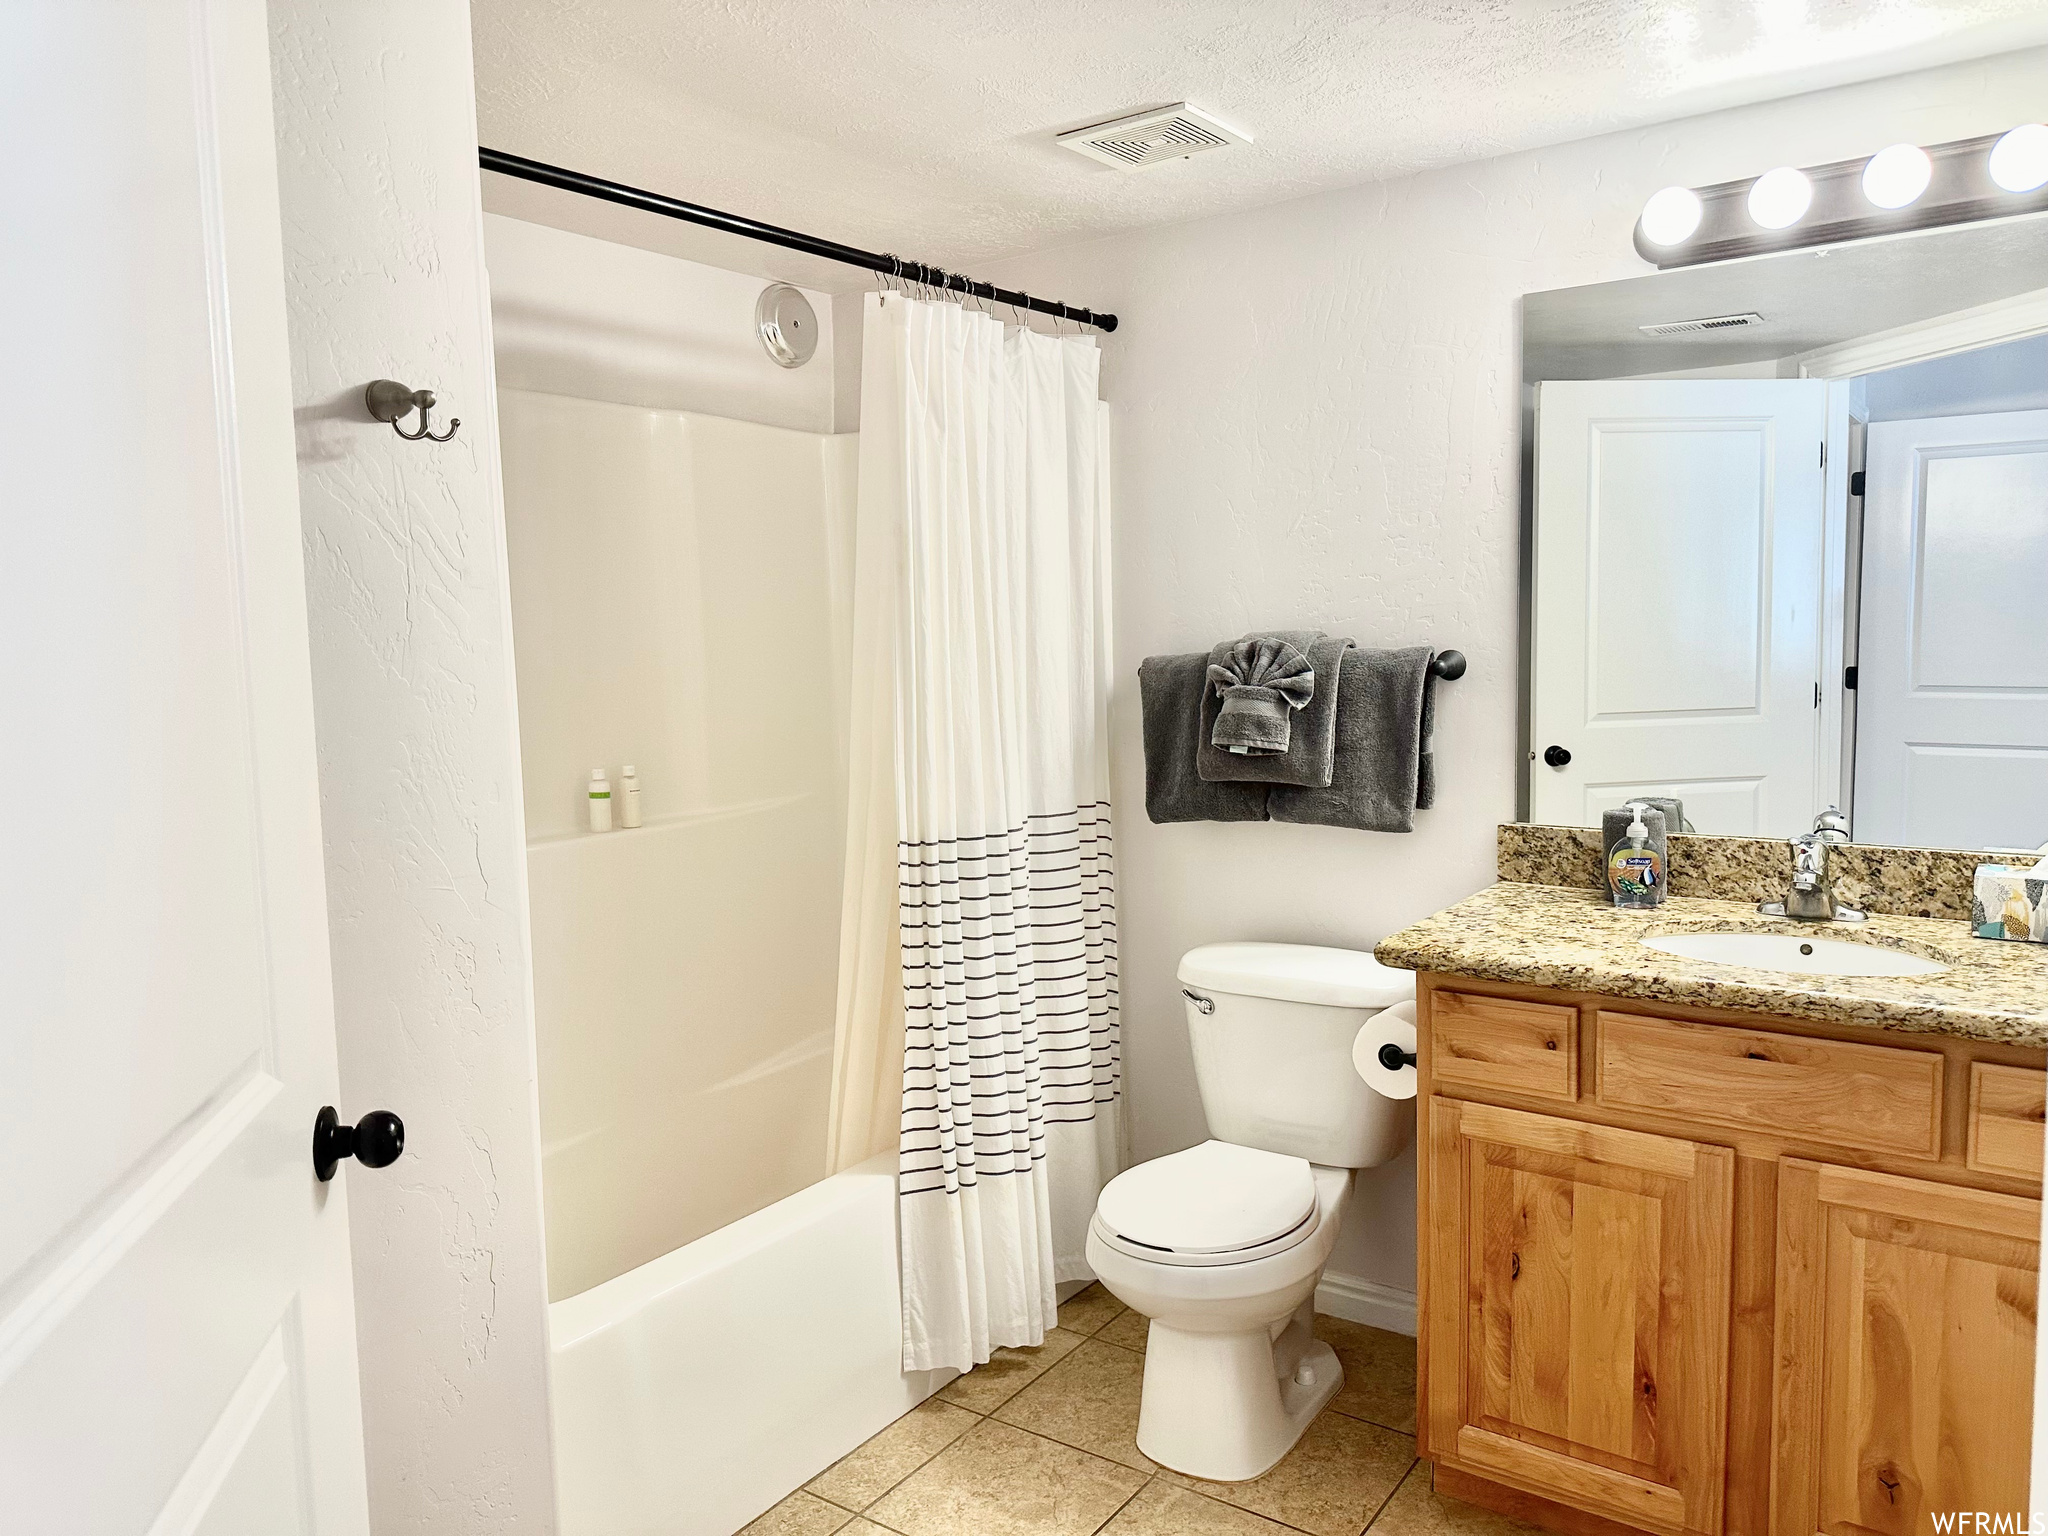 Full bathroom featuring large vanity, toilet, tile floors, a textured ceiling, and shower / bath combo with shower curtain